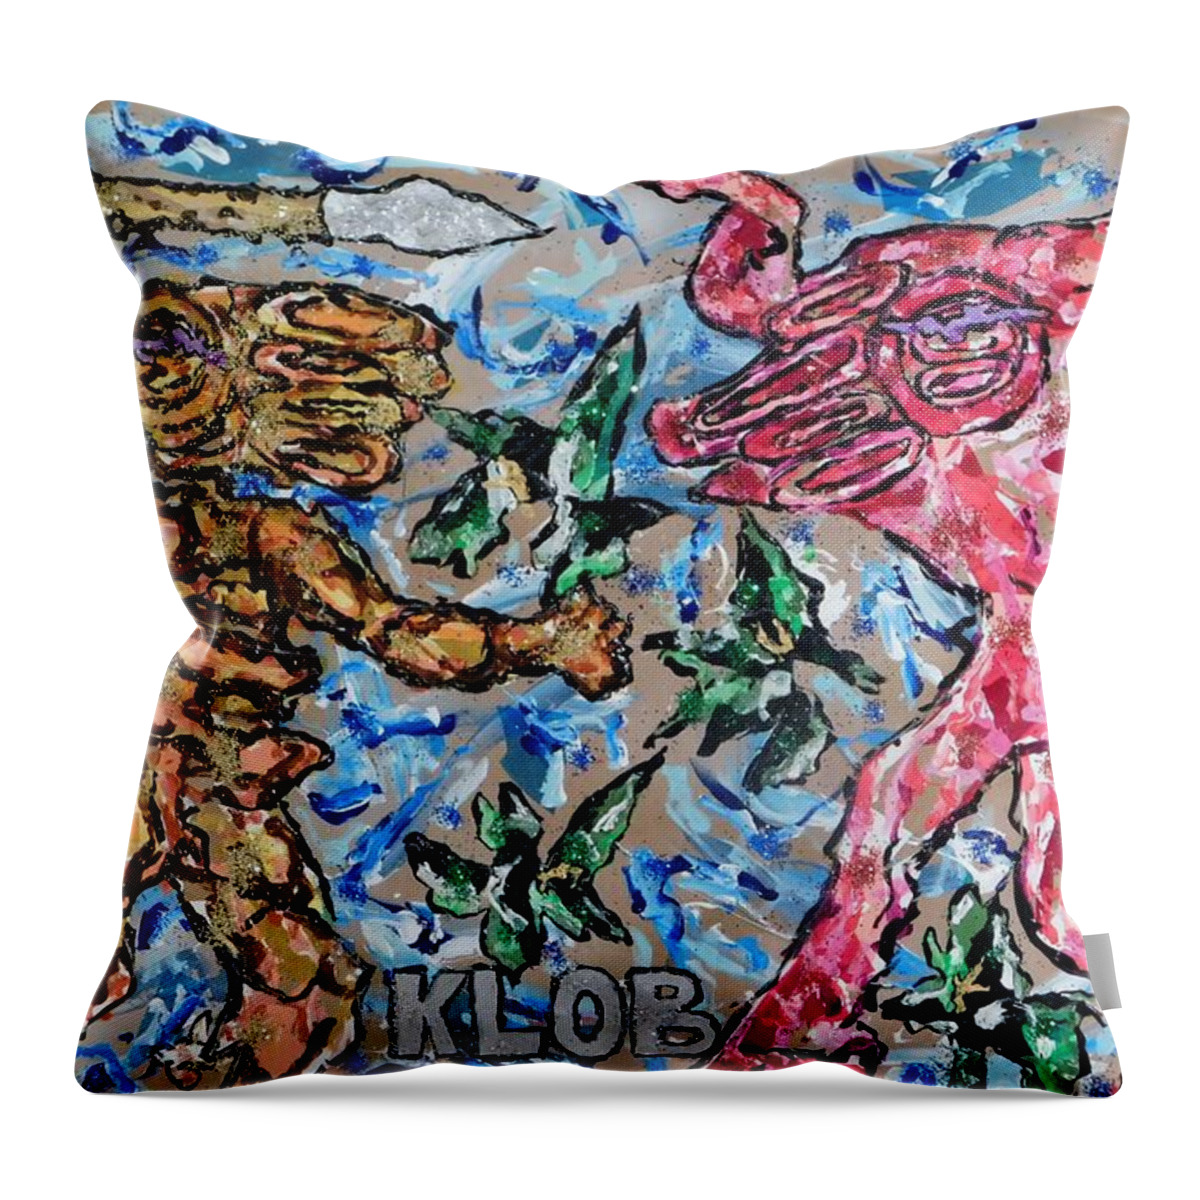 Aurochs Throw Pillow featuring the mixed media Battle Of The Aurochs Proposal for New Constellation by Kevin OBrien